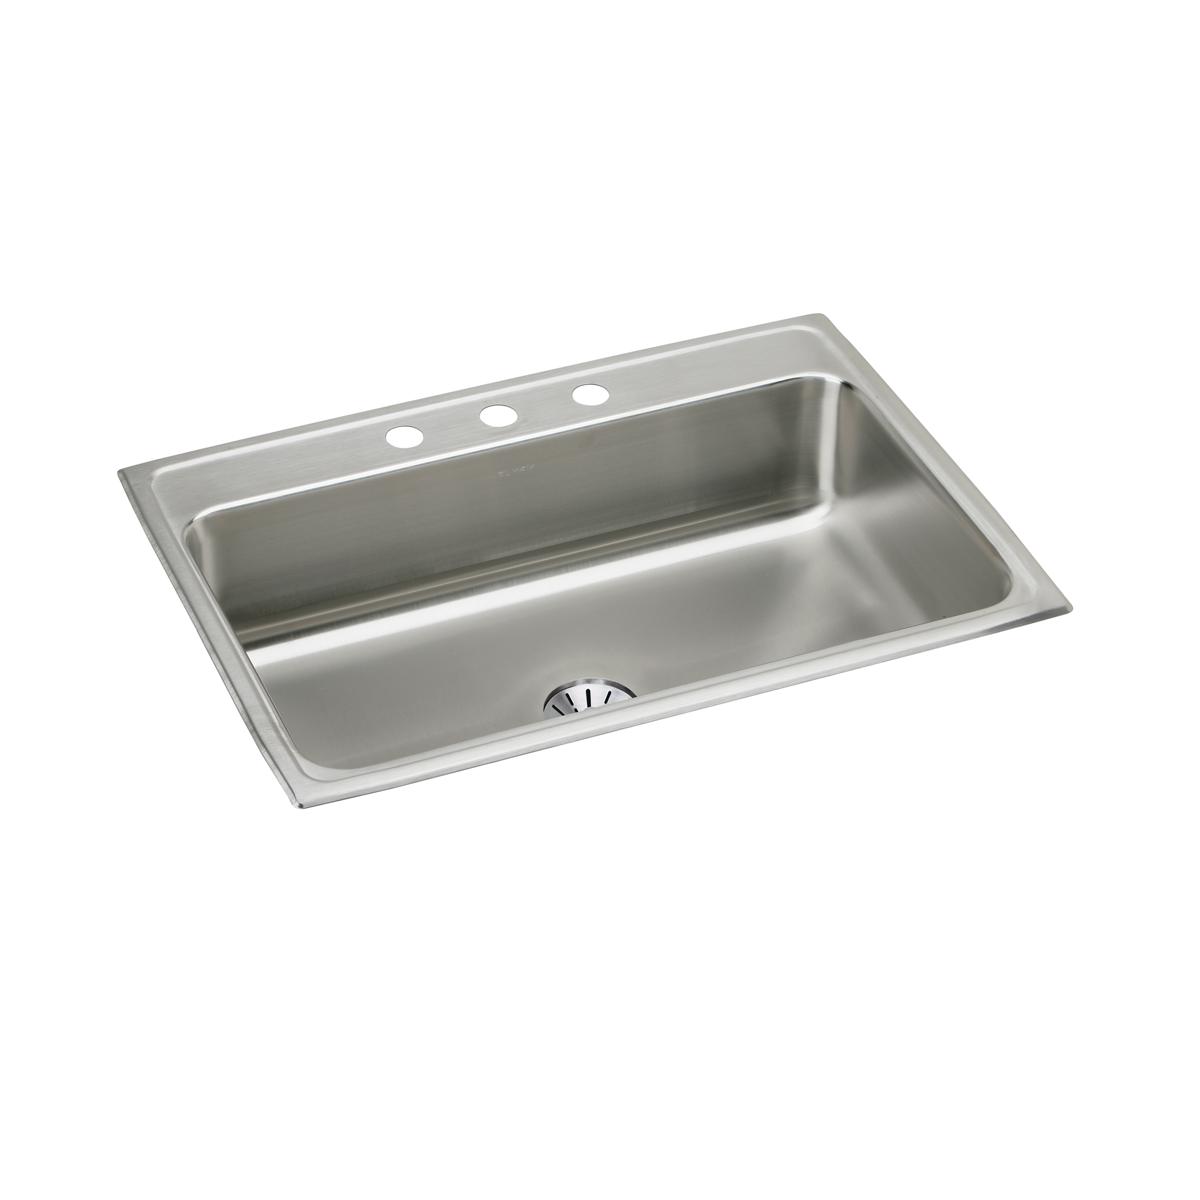 Elkay Lustertone Classic 31" x 22" x 7-5/8" Single Bowl Drop-in Sink with Perfect Drain